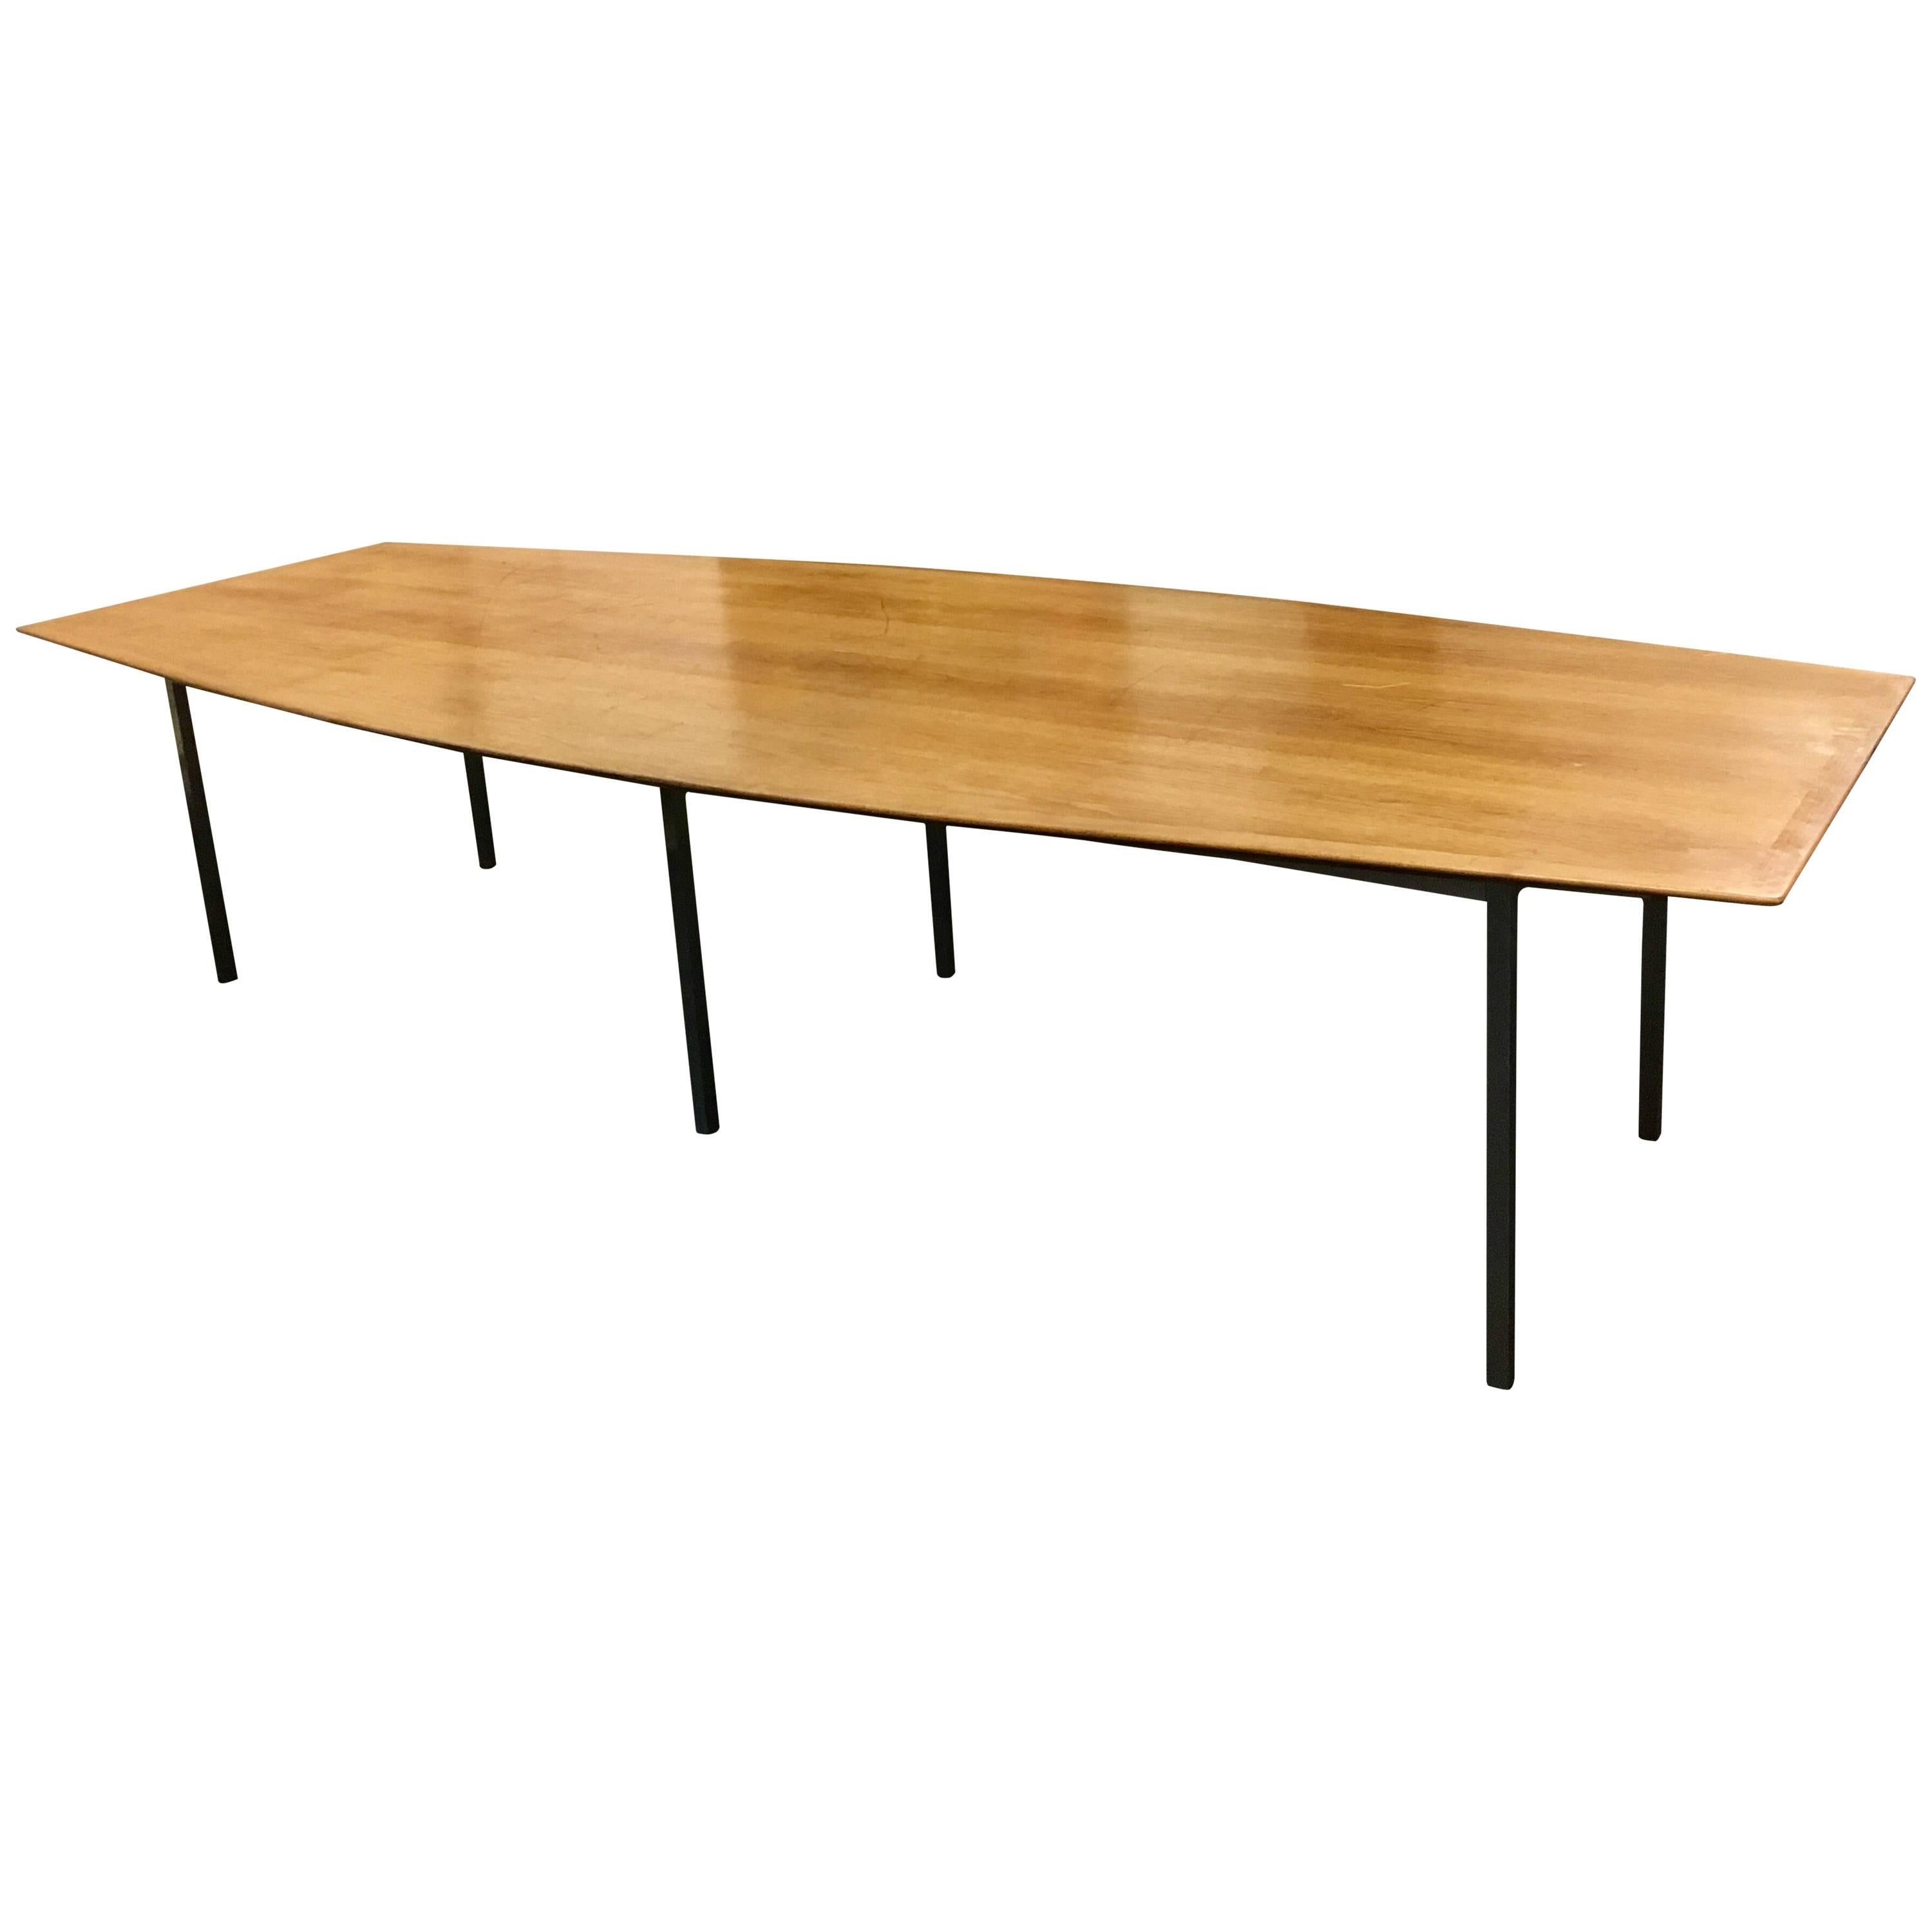 Florence Knoll "Boat" Dining or Conference Table